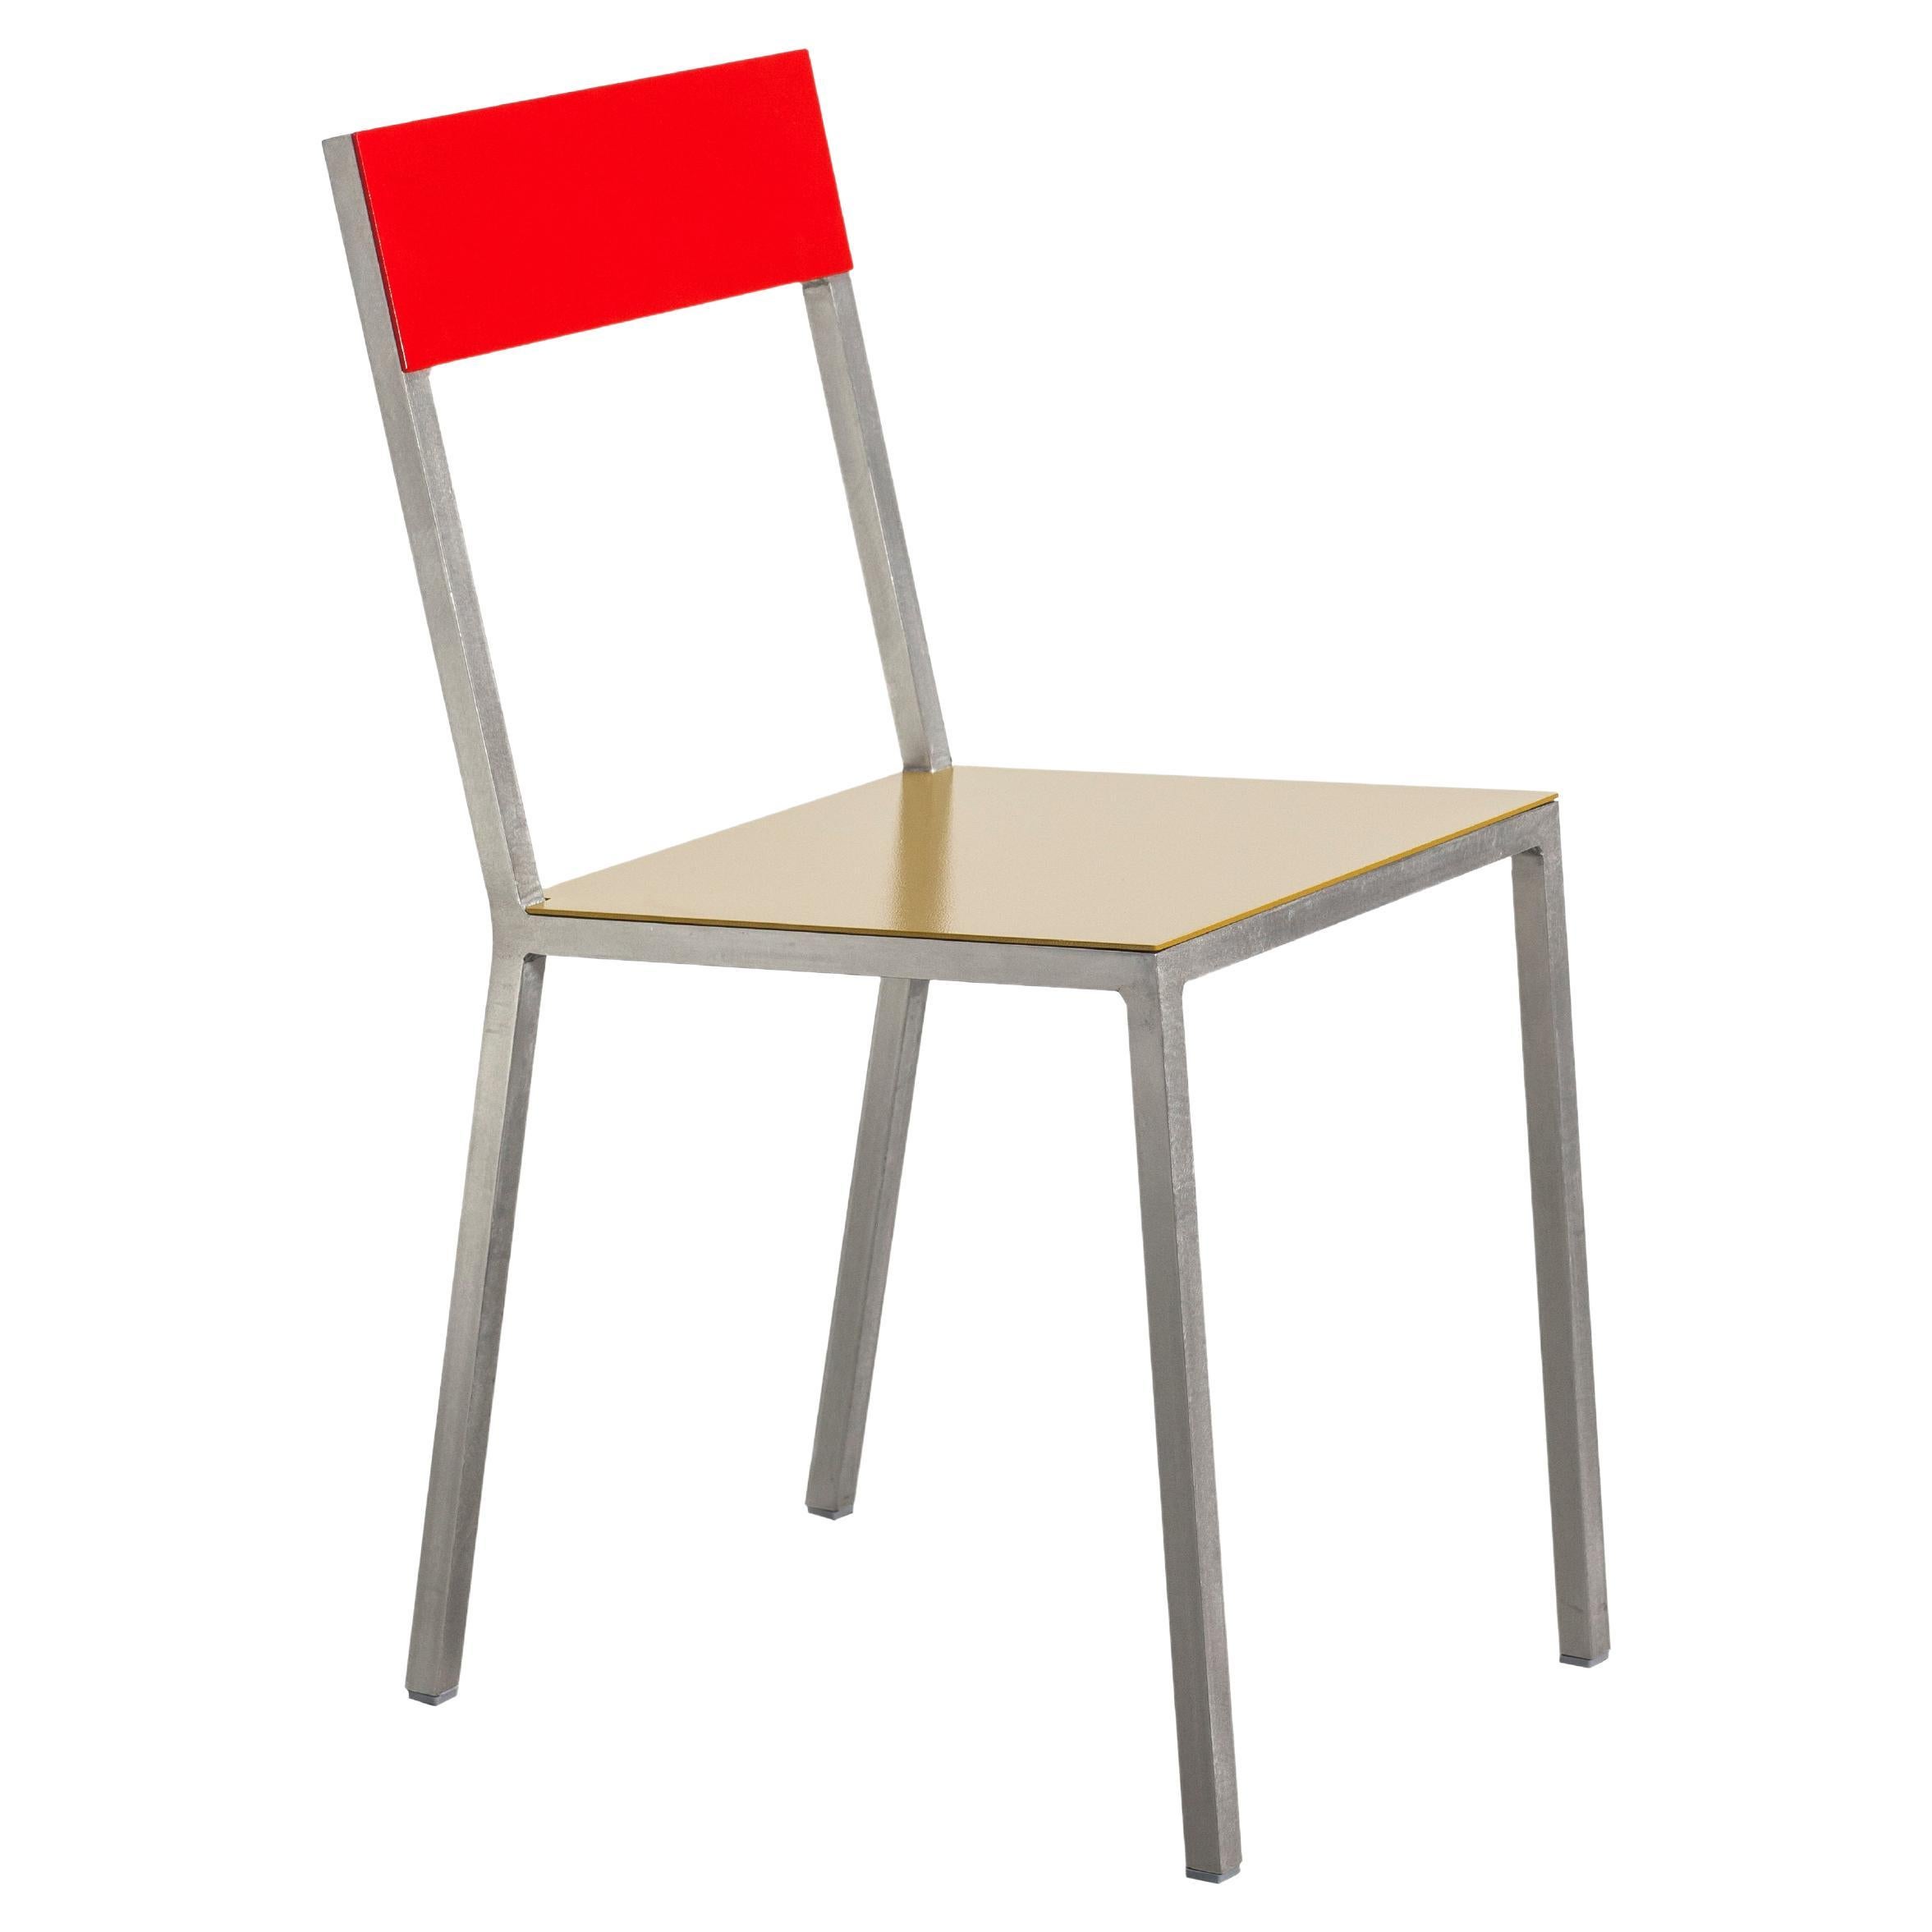 Contemporary Chair 'ALU' by Muller Van Severen x Valery Objetcs, Red + Curry